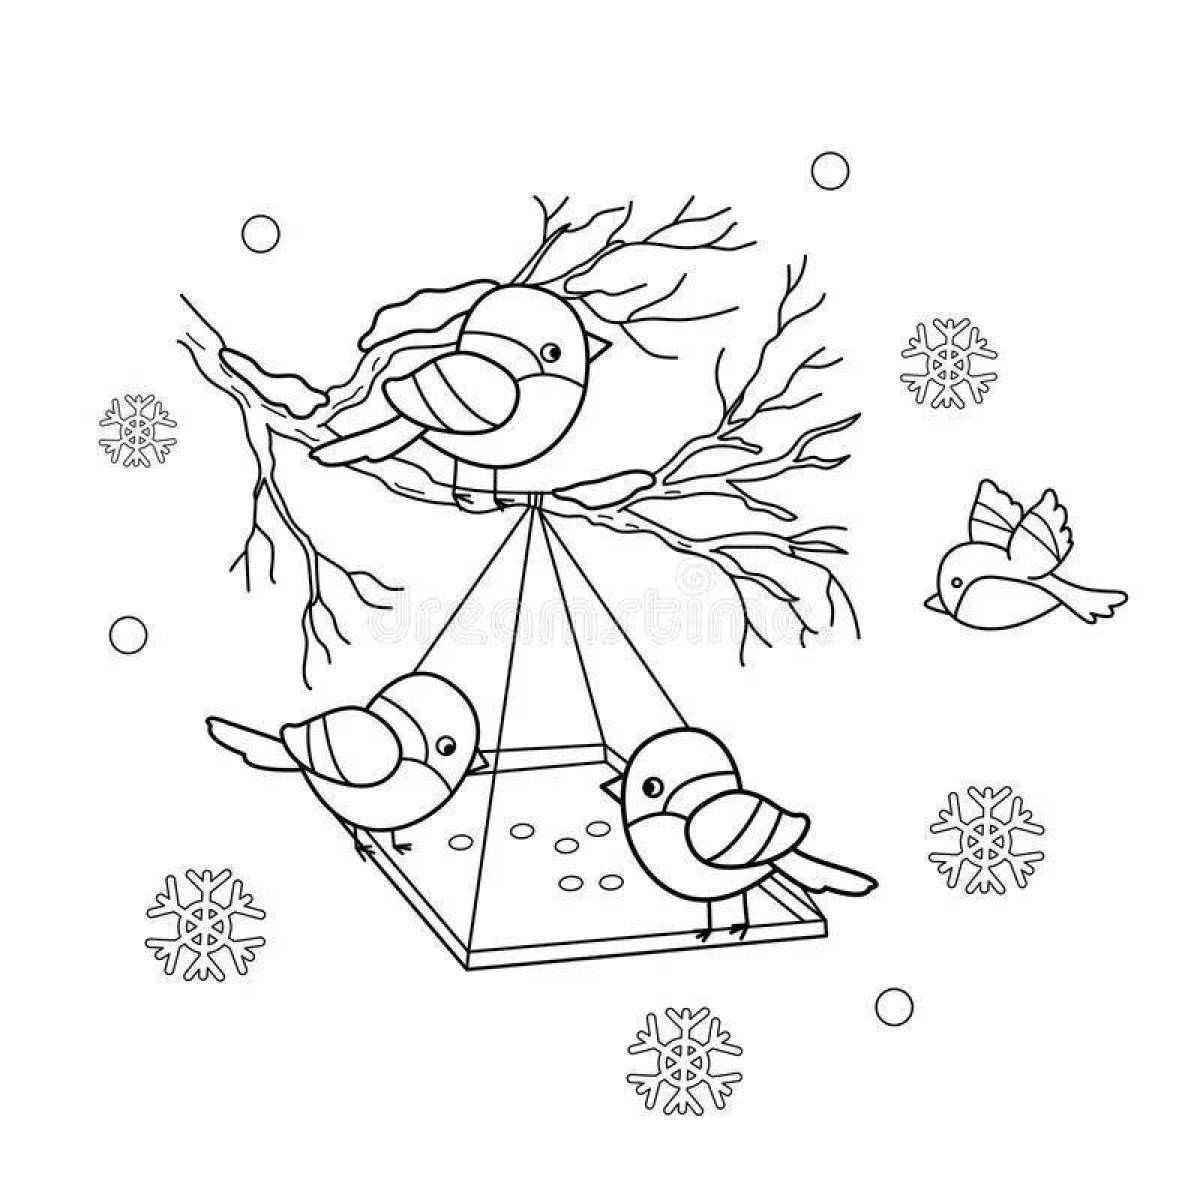 Glorious winter birds coloring pages for children